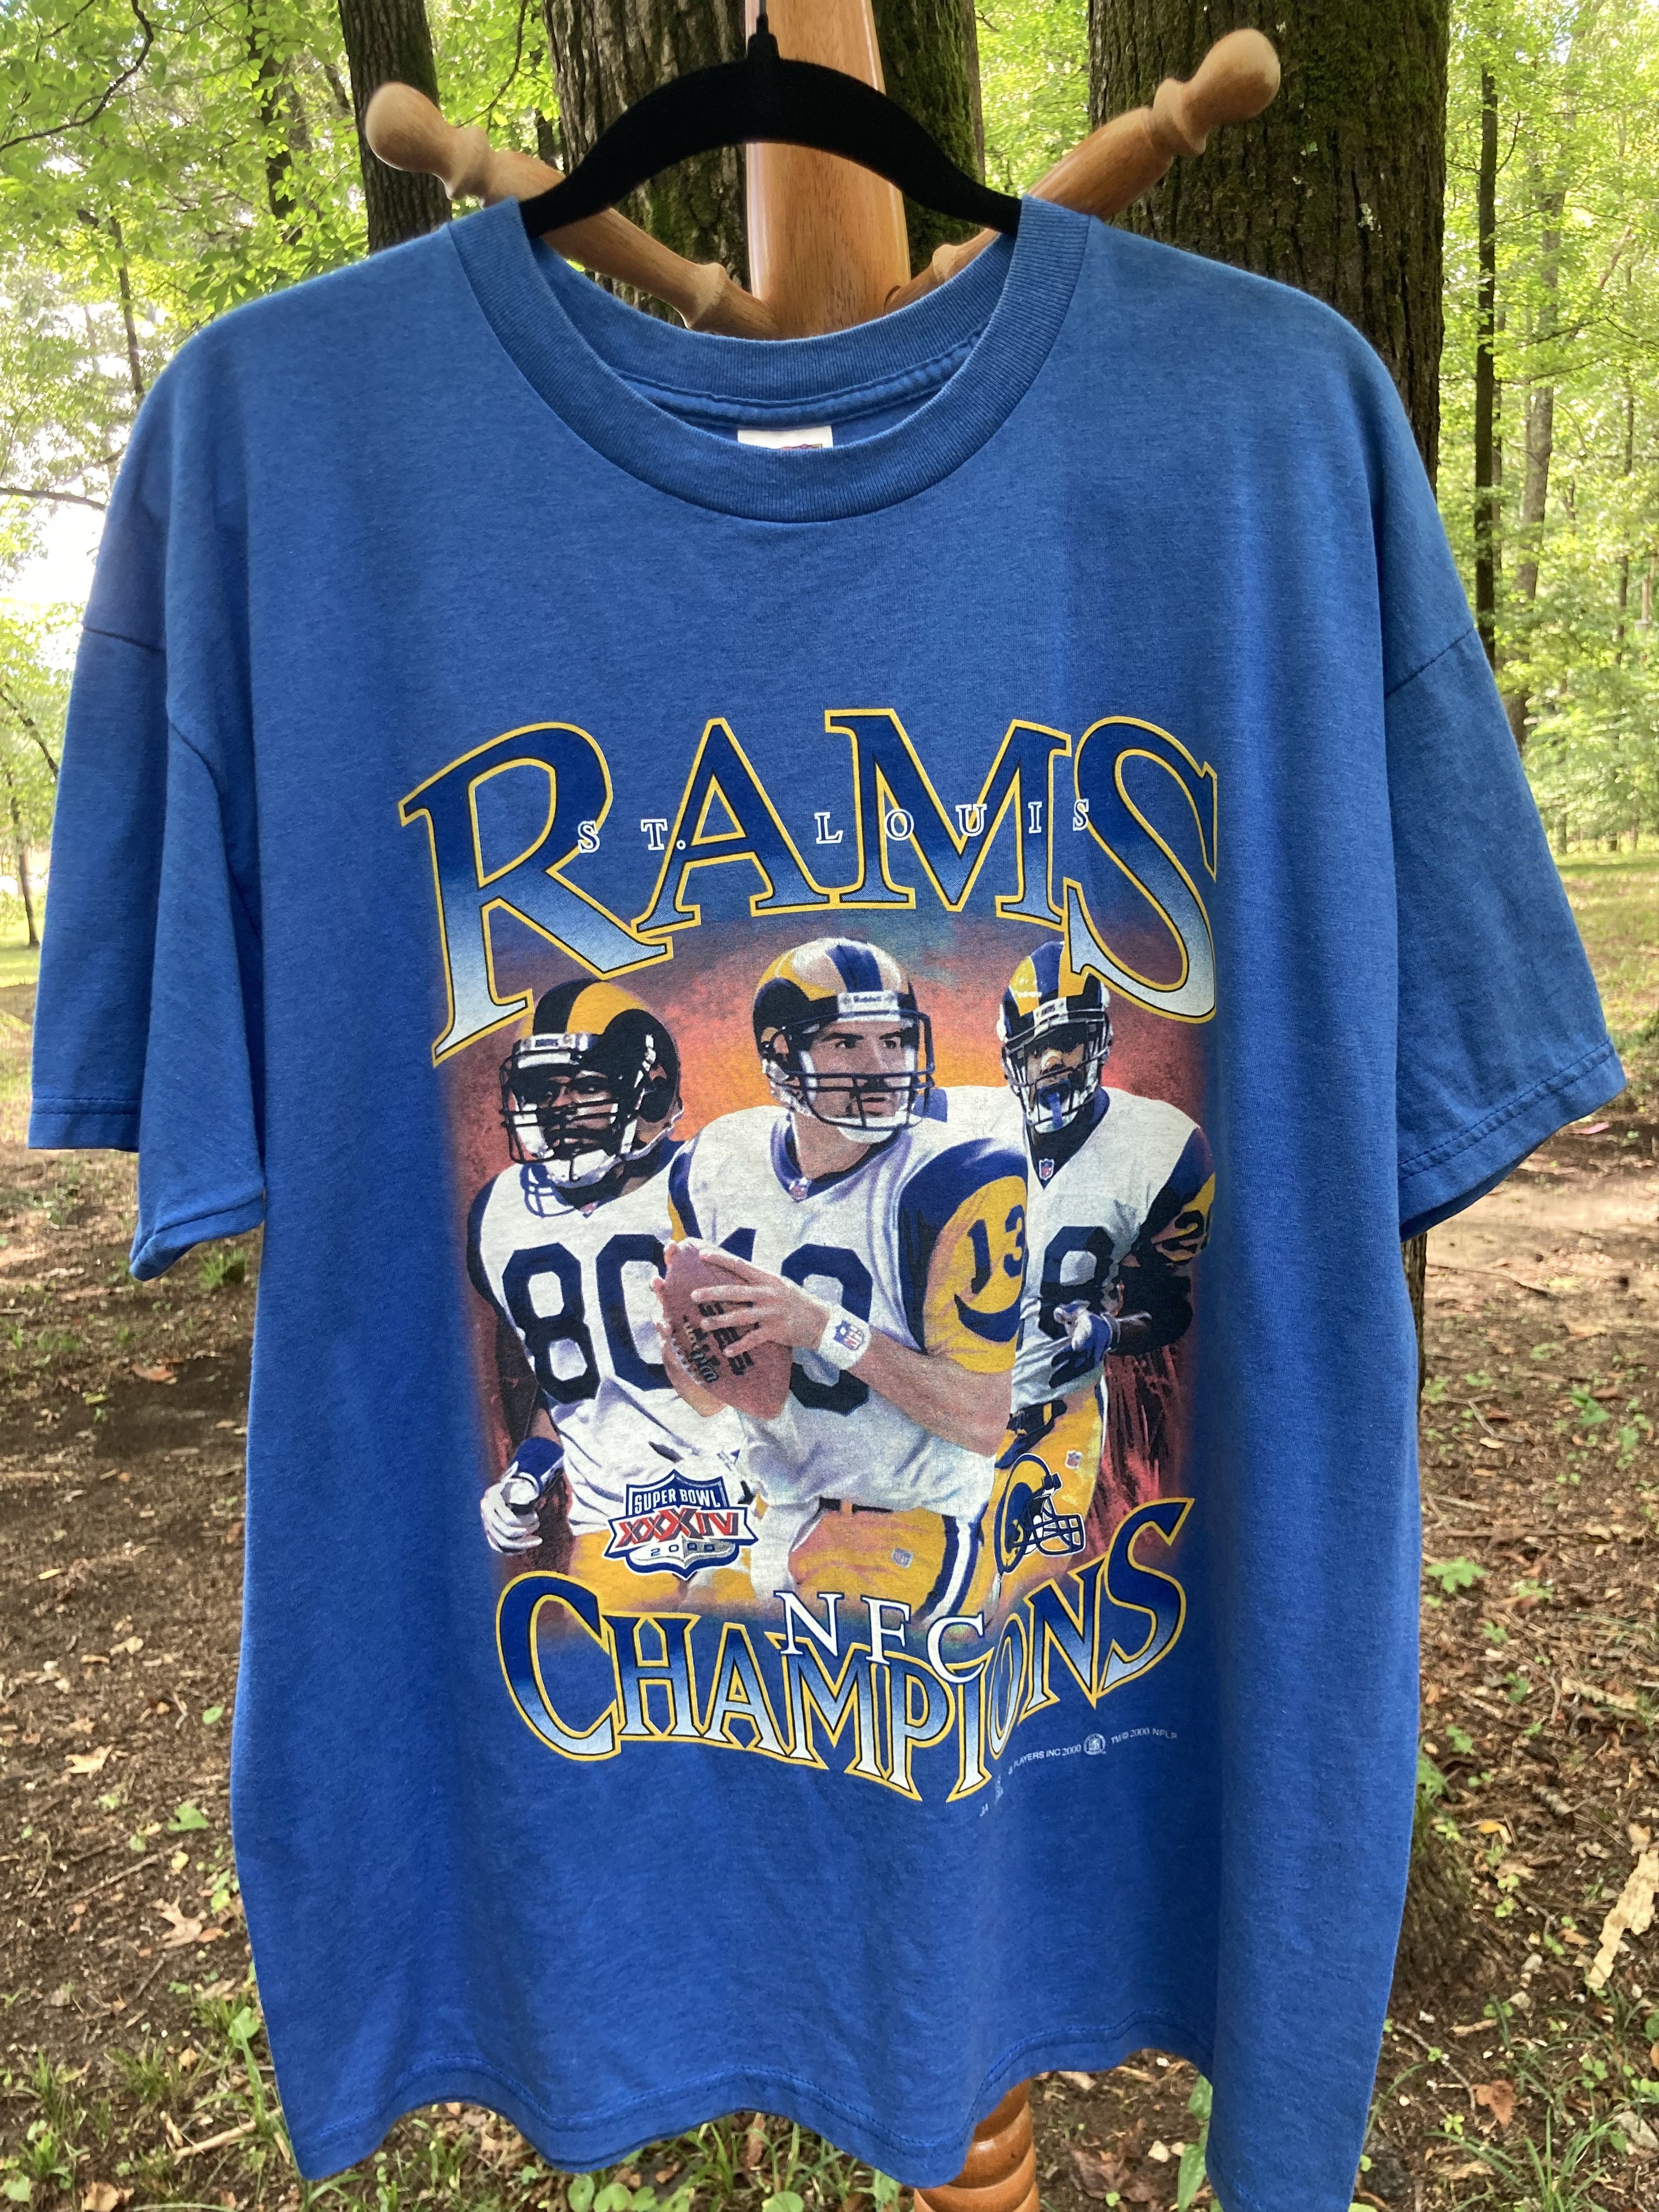 Vintage Rams NFC Champions Tee Size US XL / EU 56 / 4 - 1 Preview